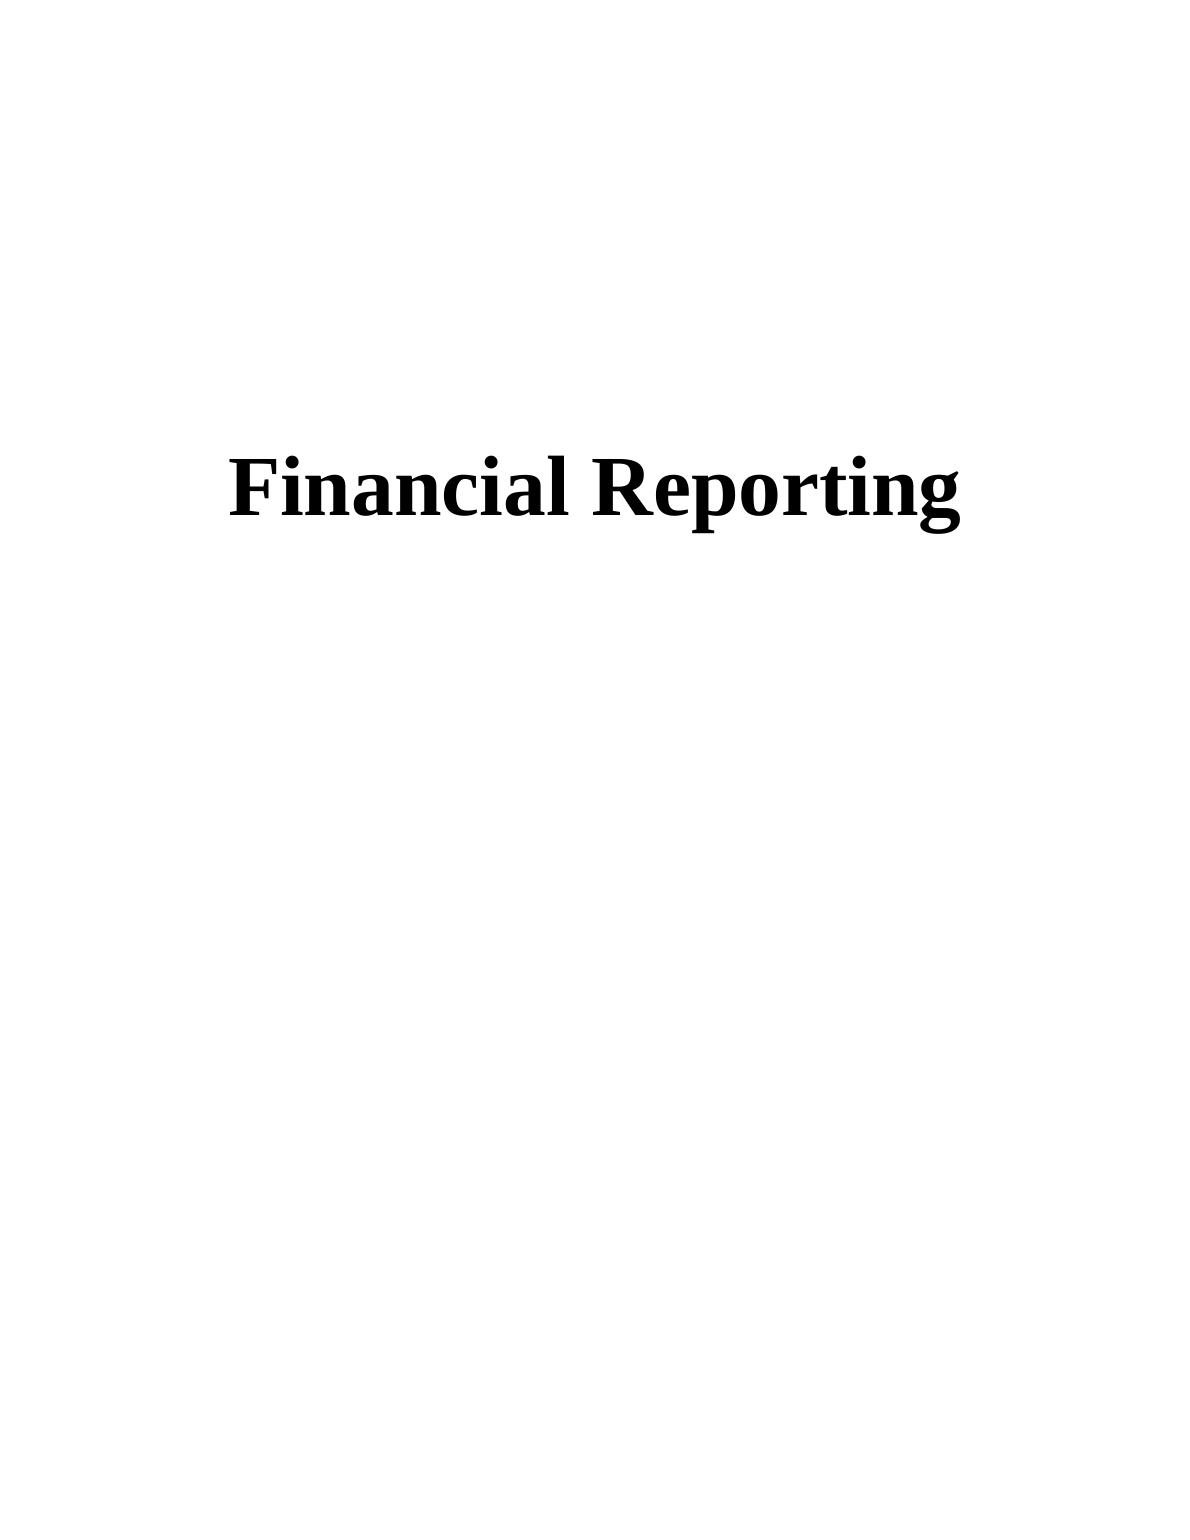 Financial Reporting INTRODUCTION_1